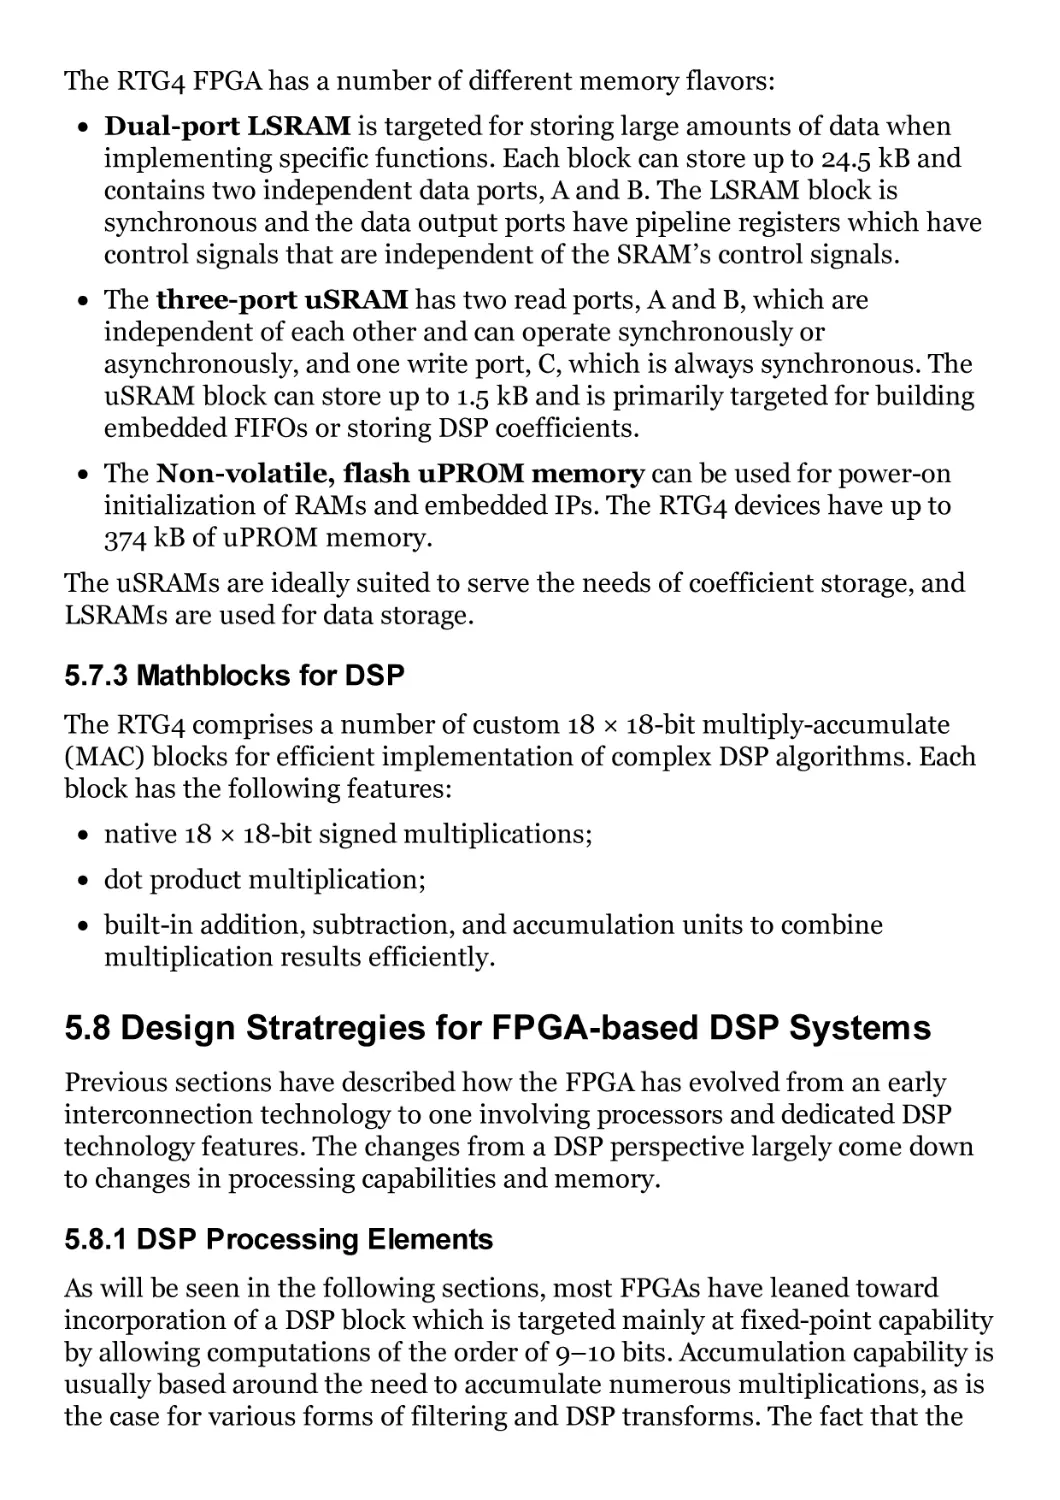 5.8 Design Stratregies for FPGA-based DSP Systems